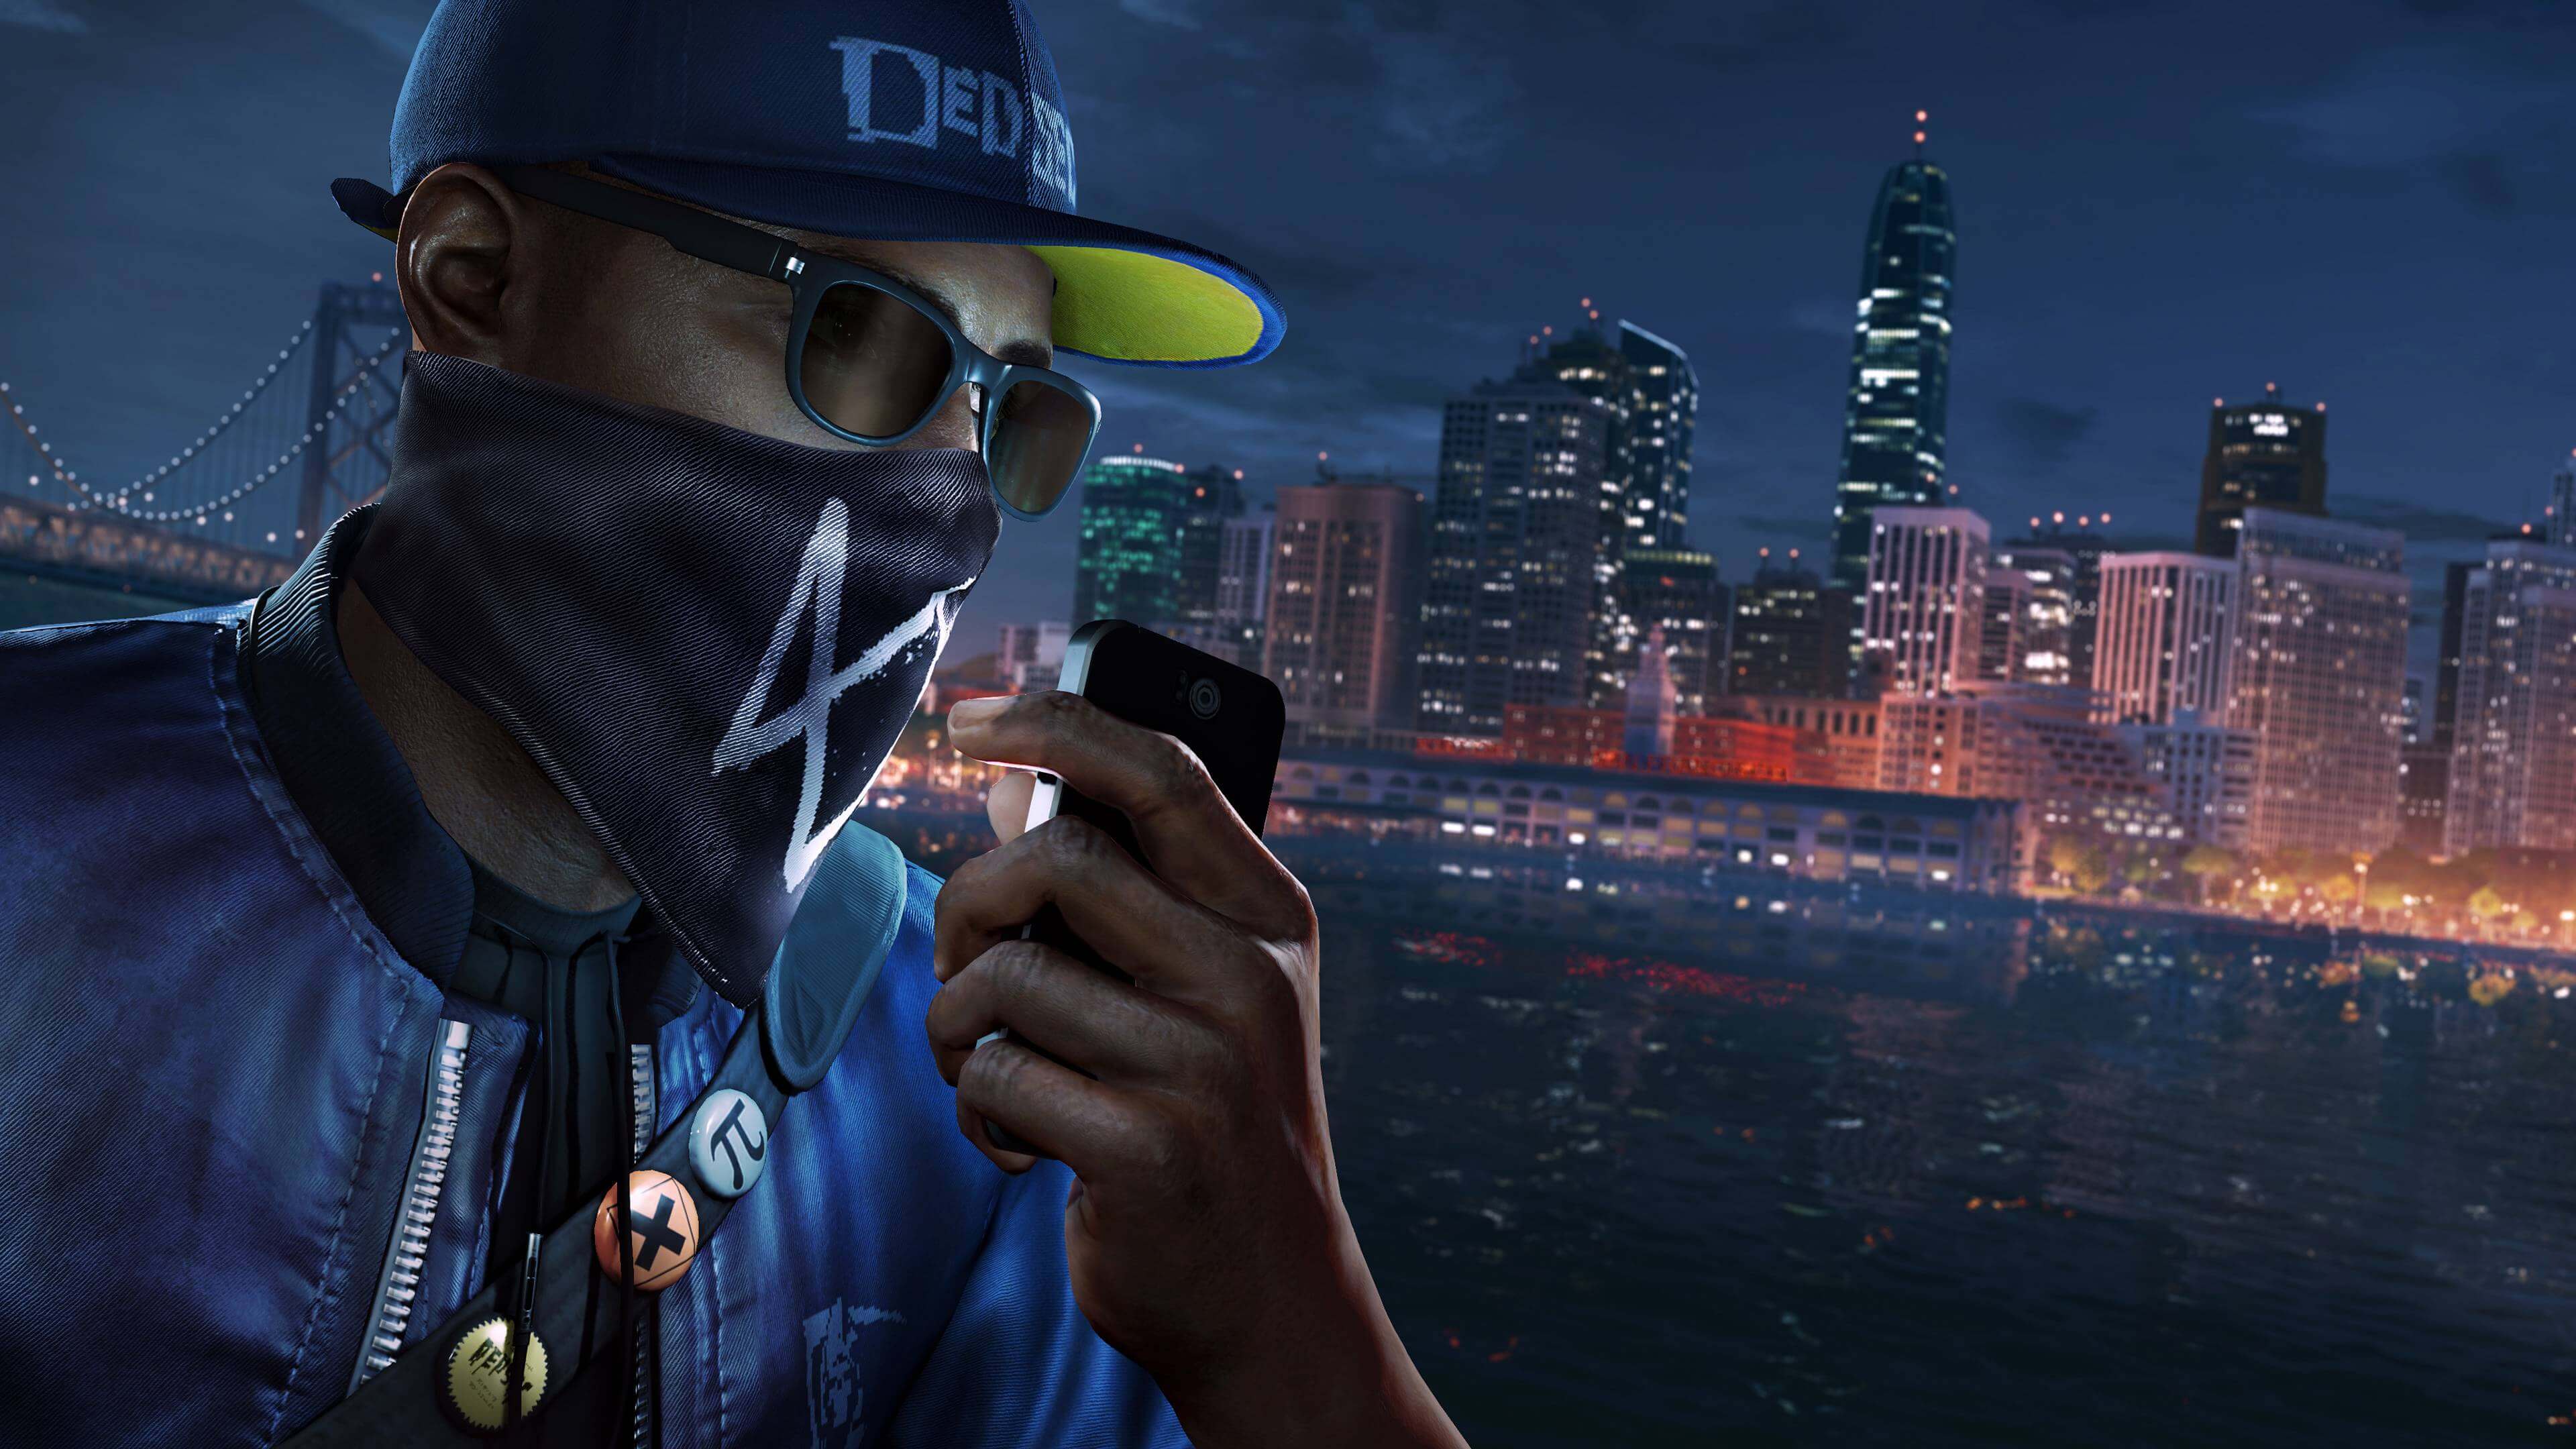 watch dogs 2 download pc